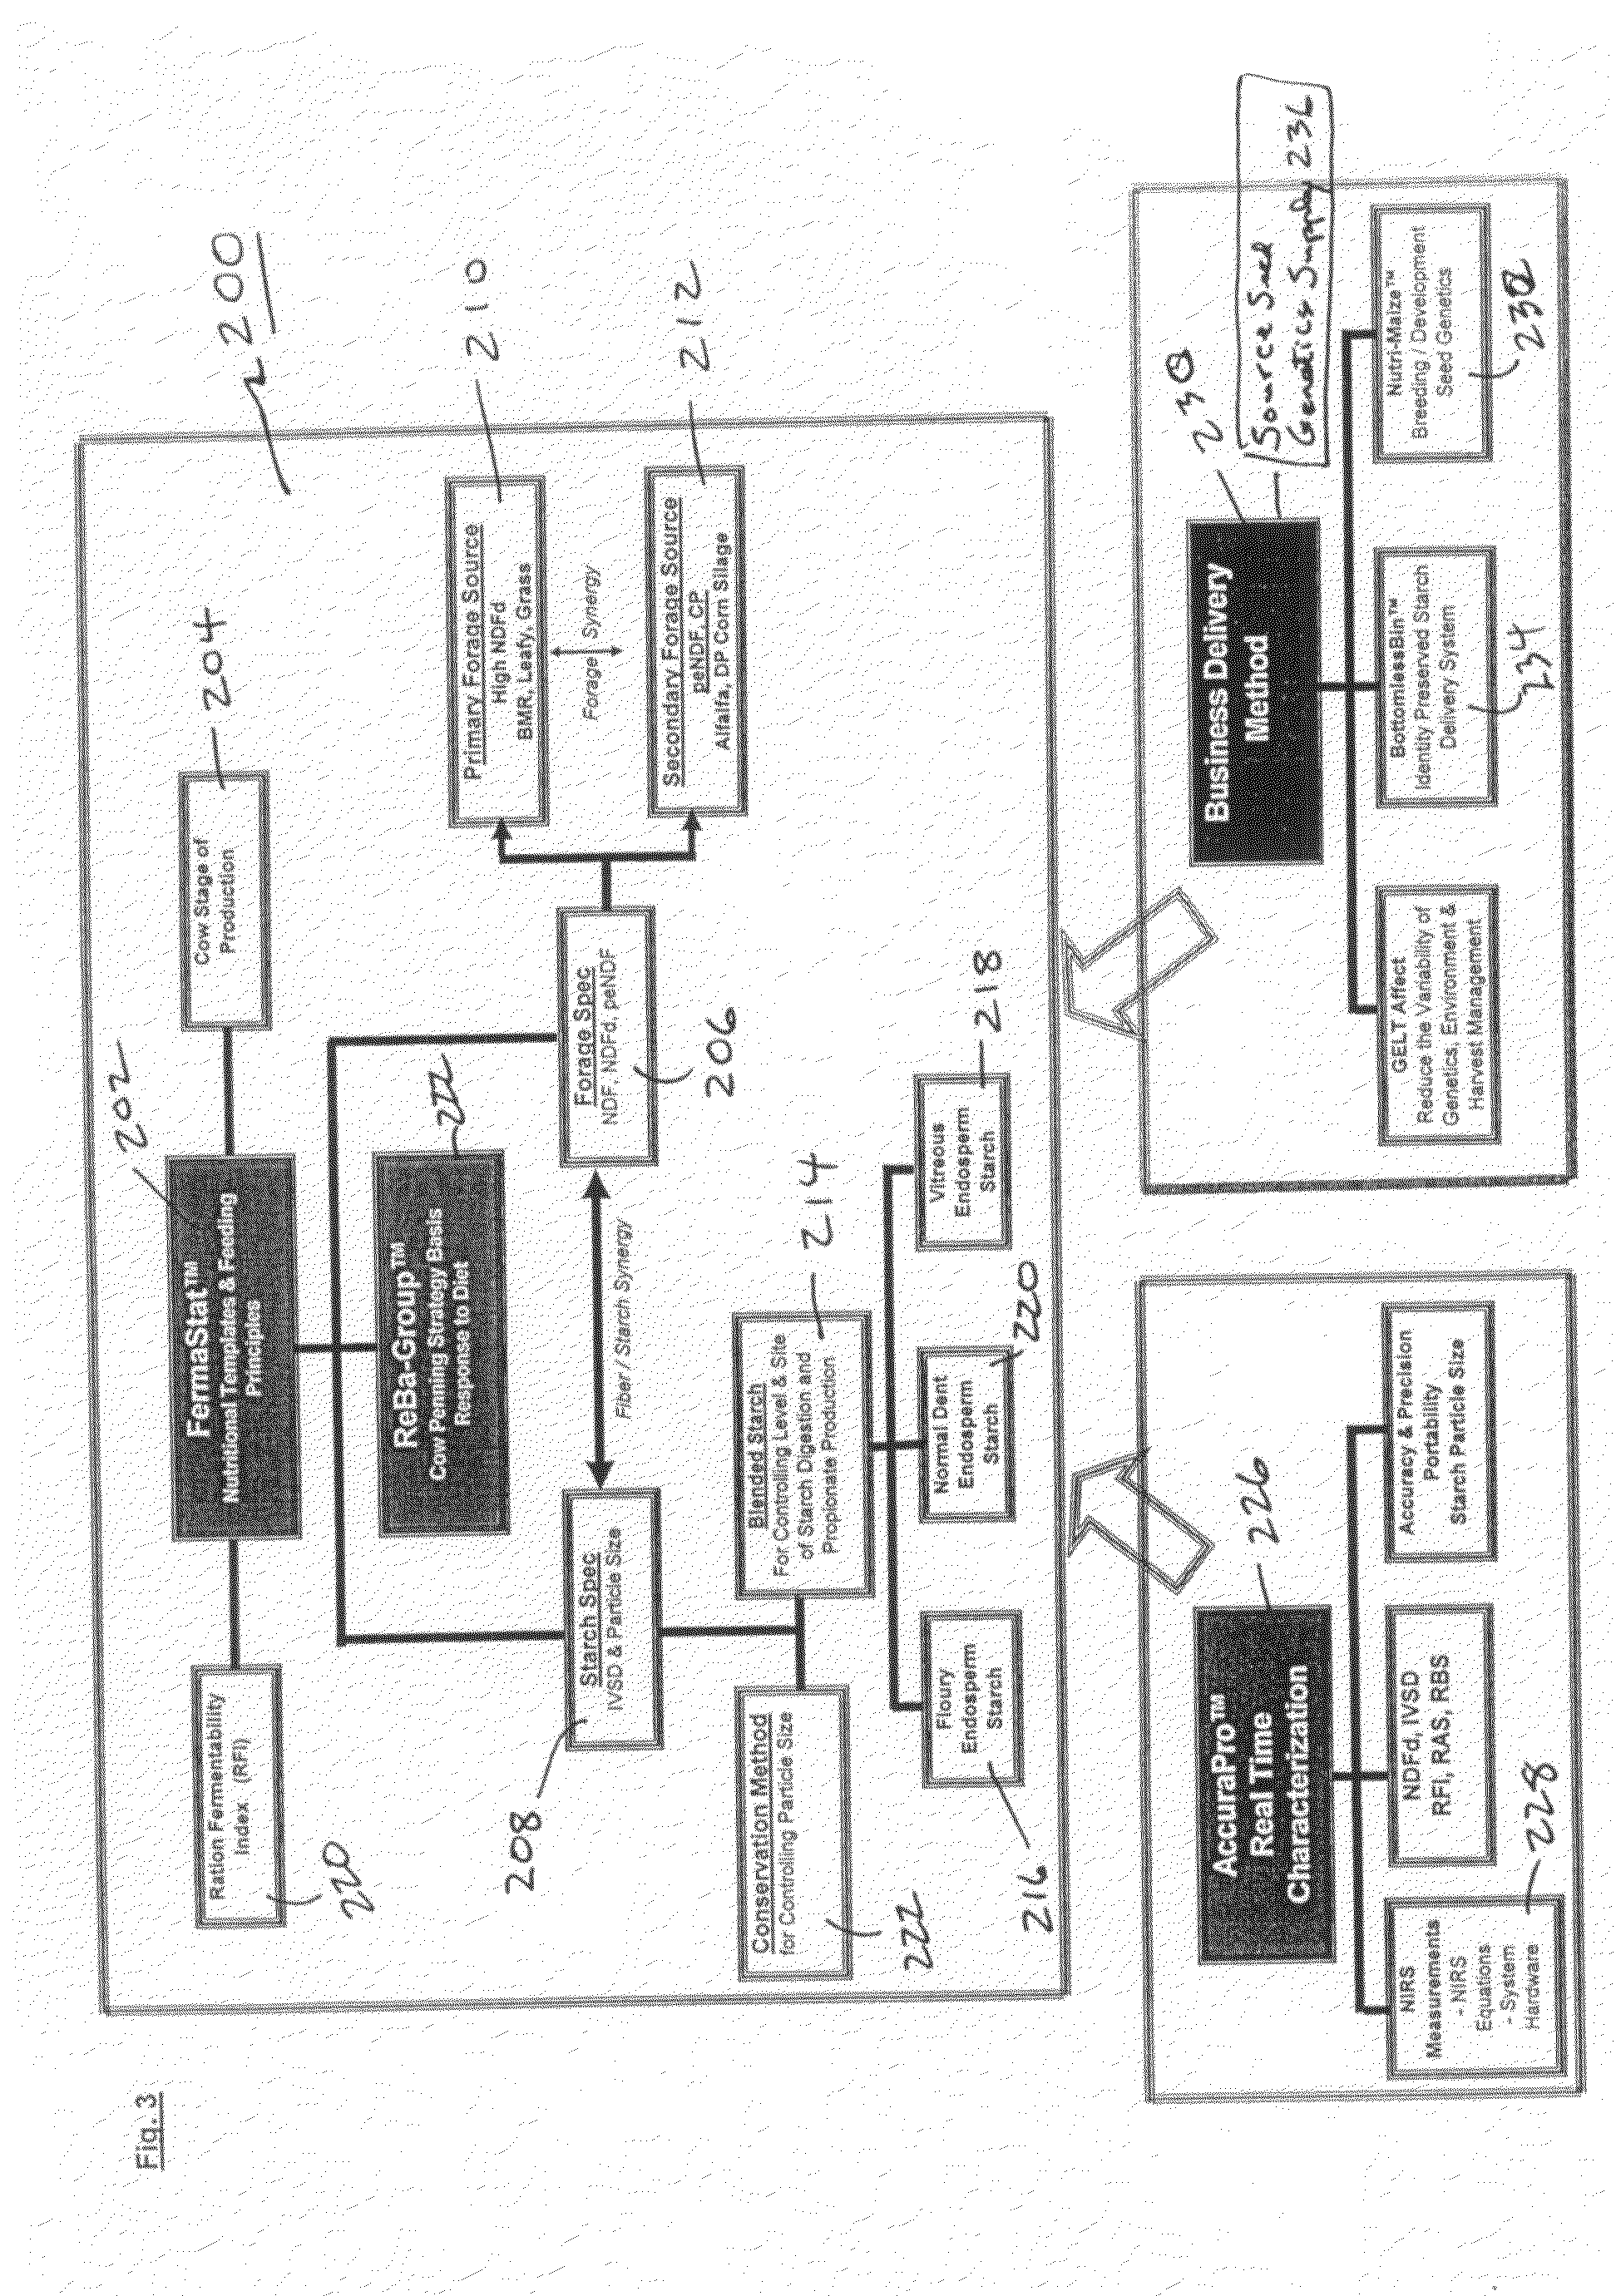 Method and feed for enhancing ruminant animal nutrition